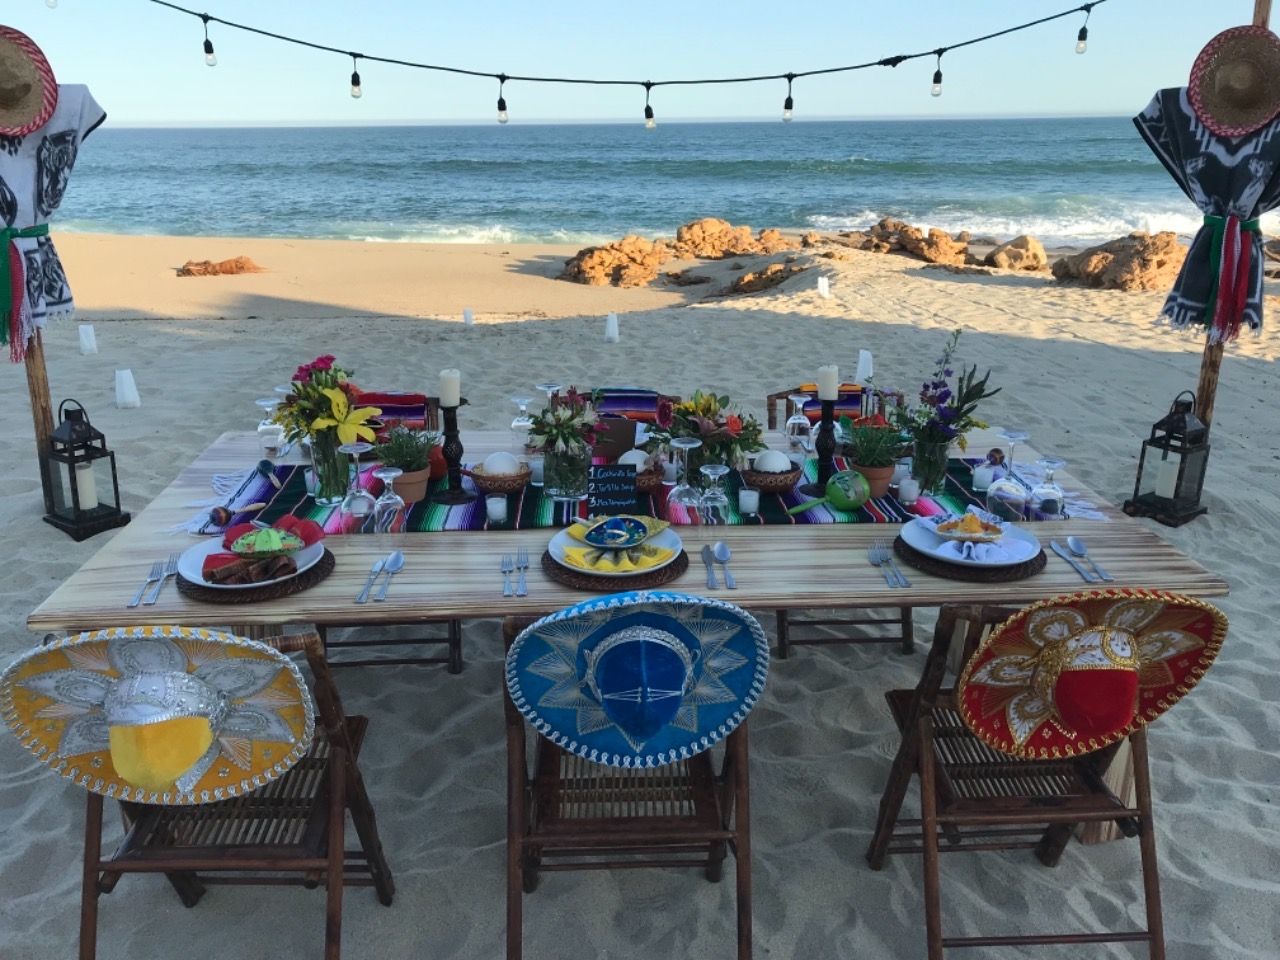 a table is set up on the beach with sombrero hats on the chairs